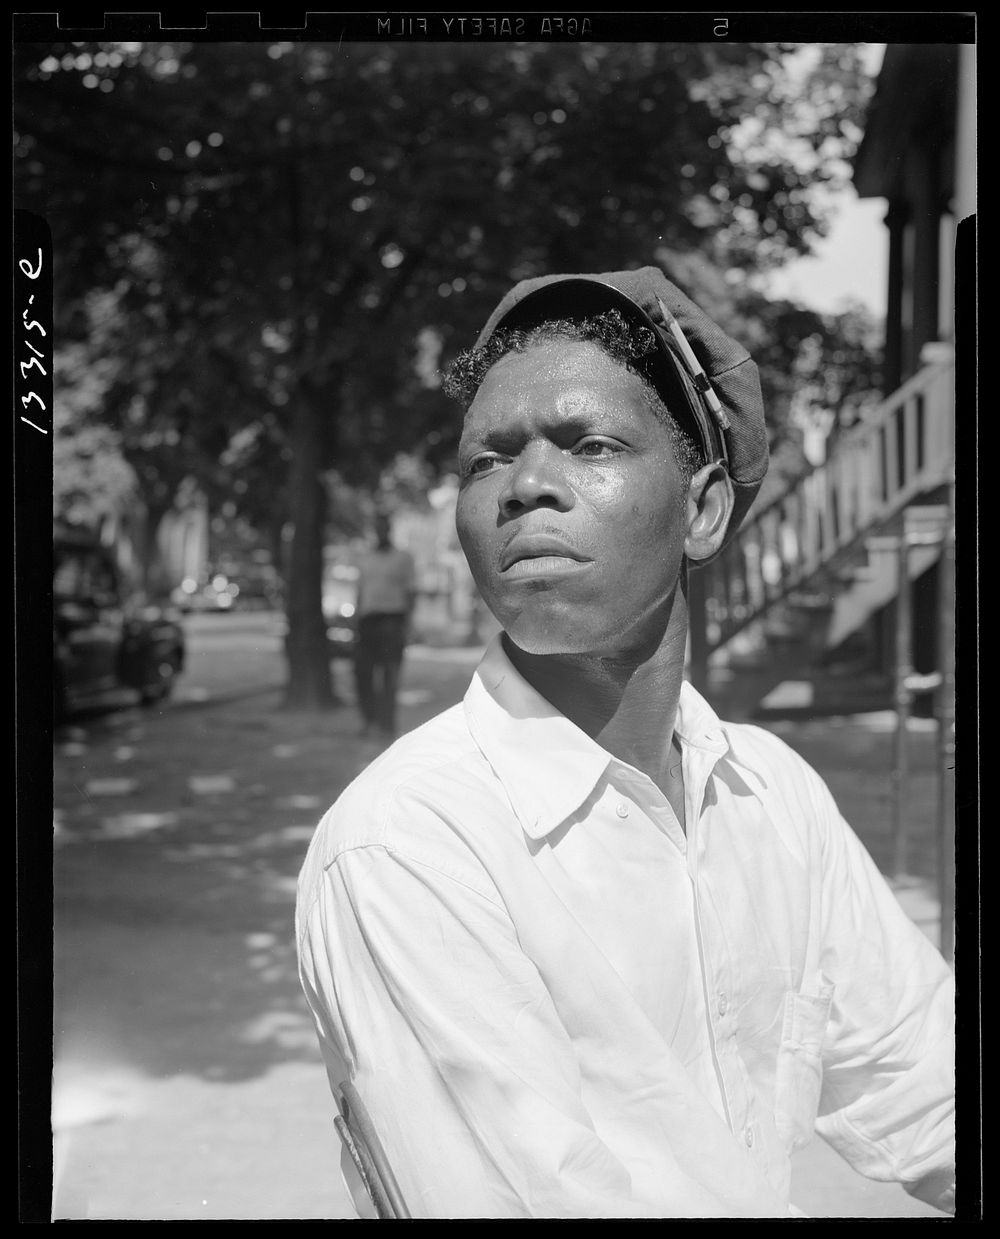 Washington, D.C. A machine shop worker who lives in the Southwest section. Sourced from the Library of Congress.